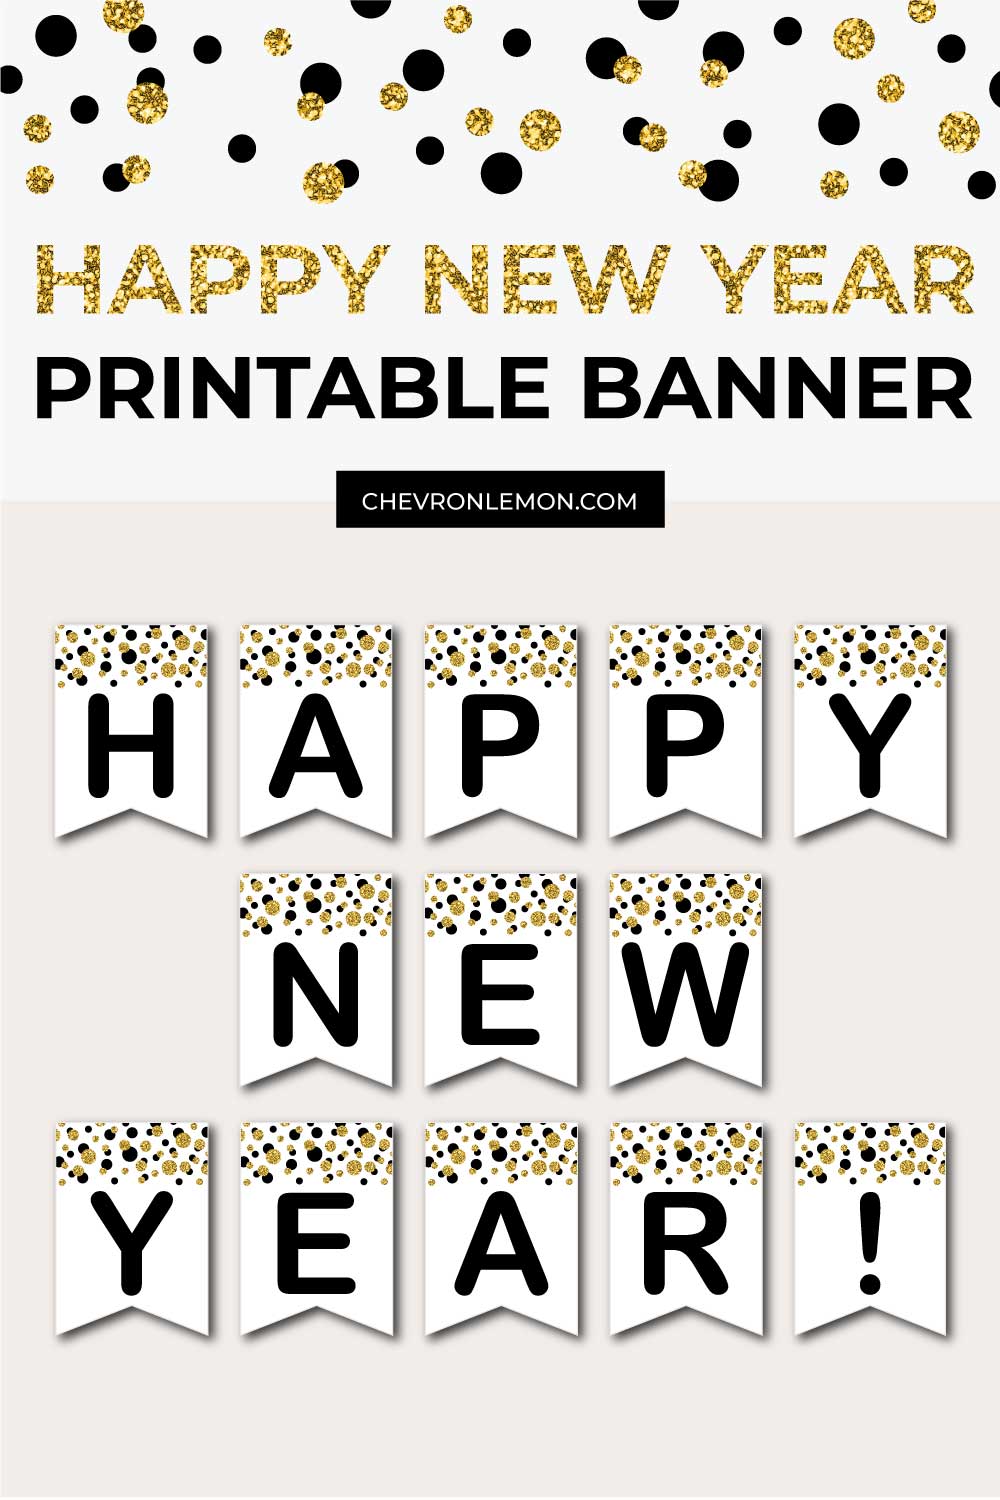 Free Printable Happy New Year Banner (black and golden confetti